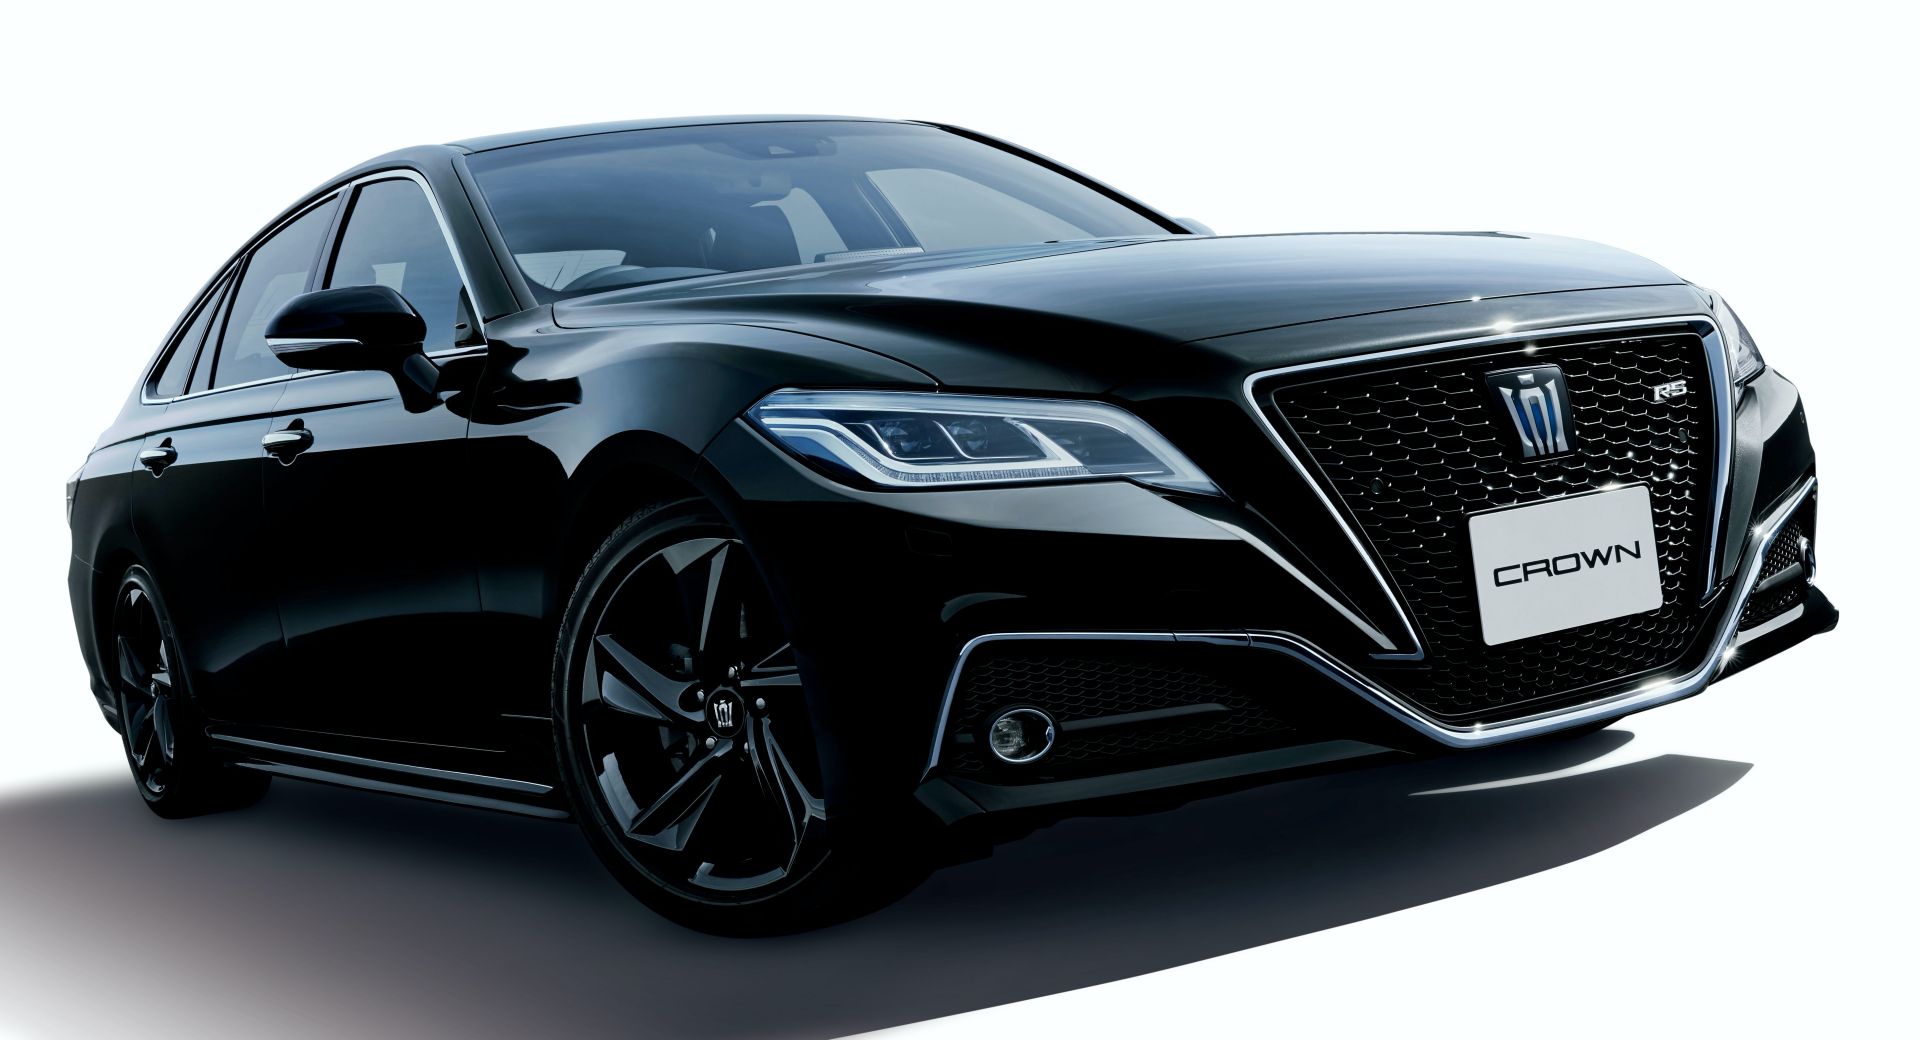 Toyota Crown Executive Sedan Gains Three Special Editions For Its 65th ...